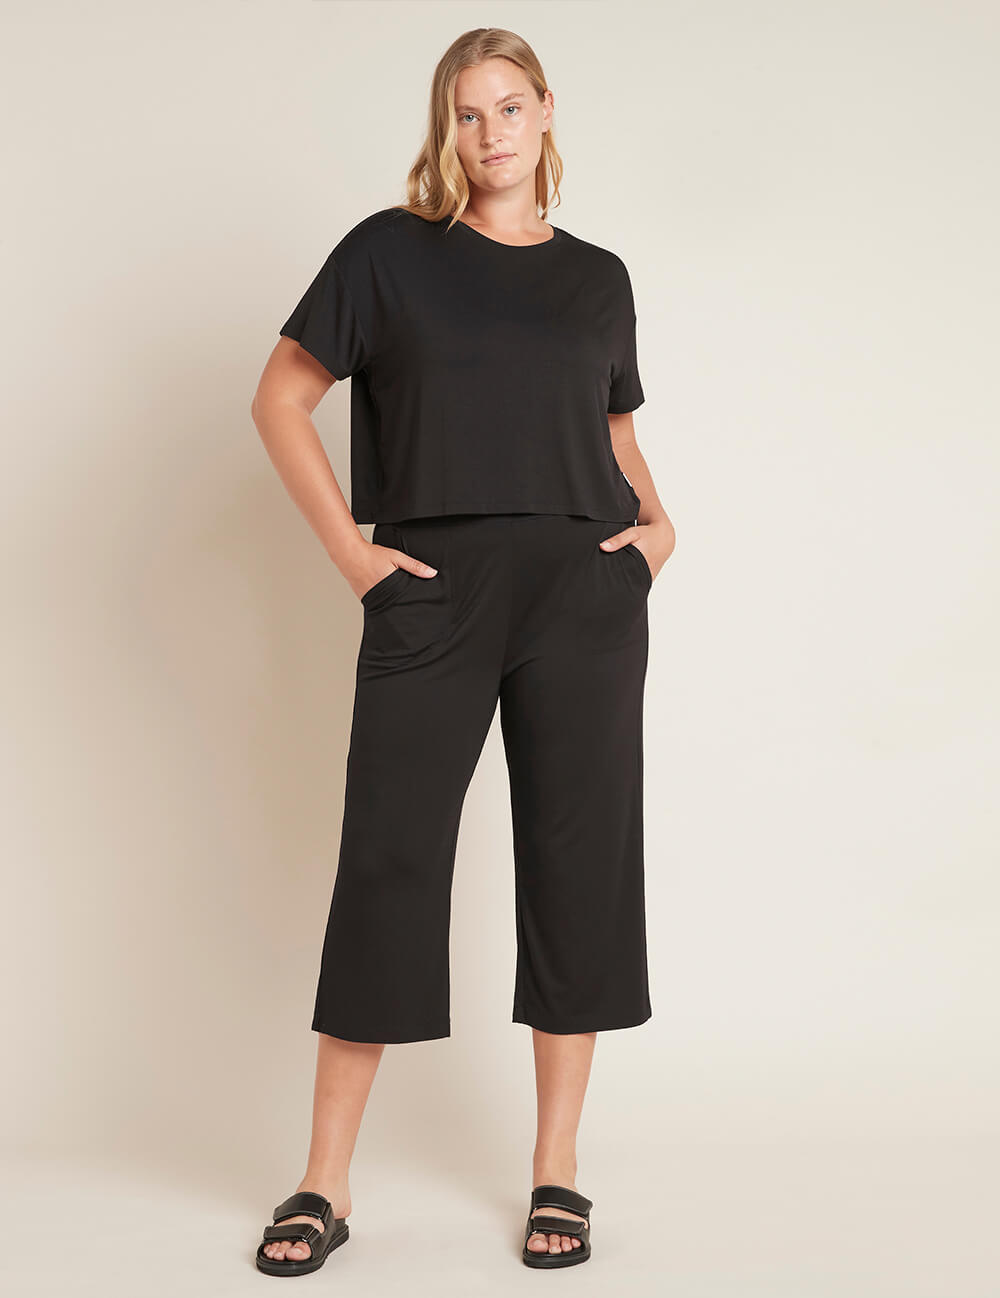 Boody Women's Downtime Crop Pant in Storm Black Front